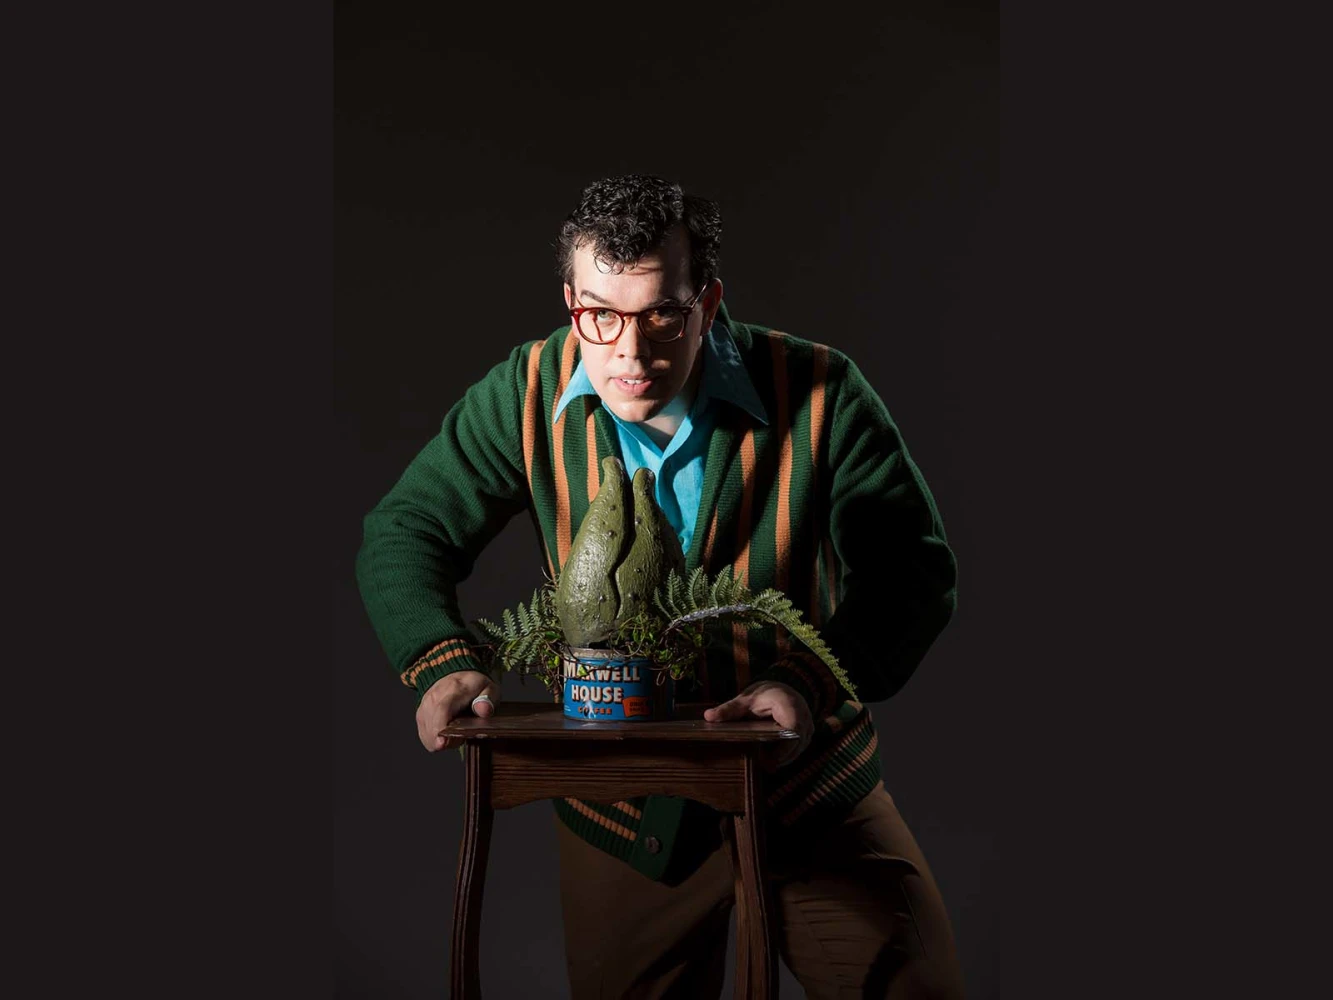 Little Shop of Horrors at Village Theatre Everett: What to expect - 1